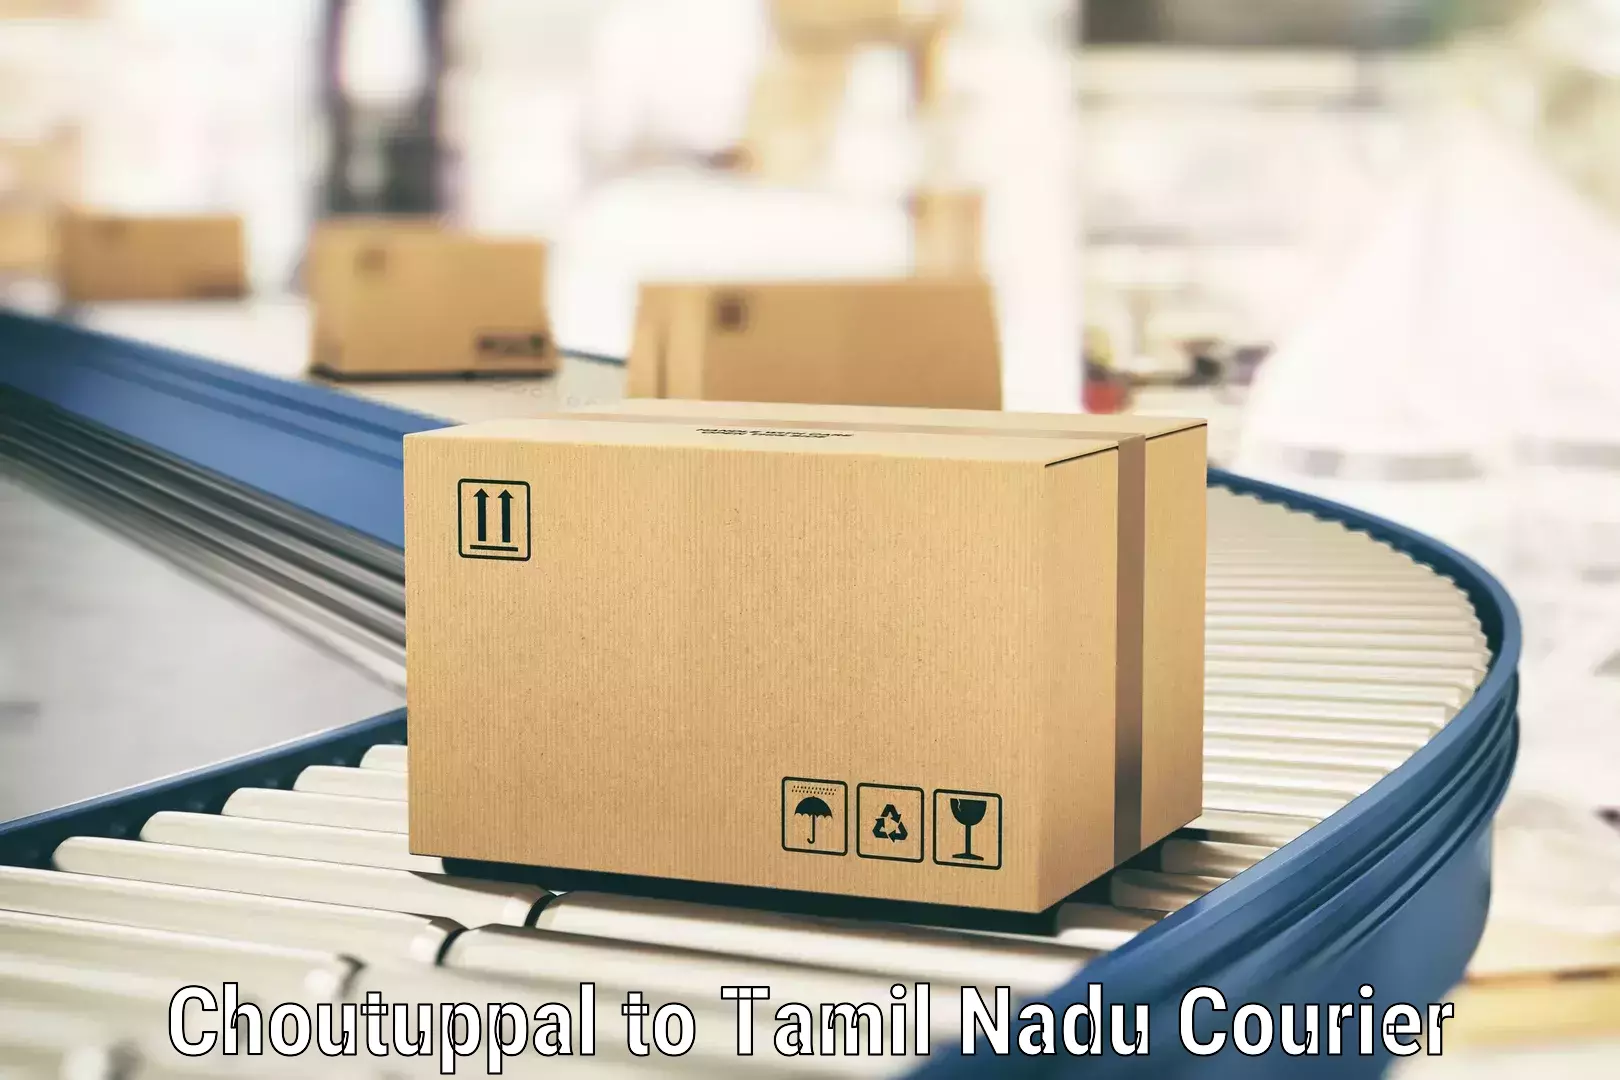 Expedited parcel delivery Choutuppal to Kotagiri